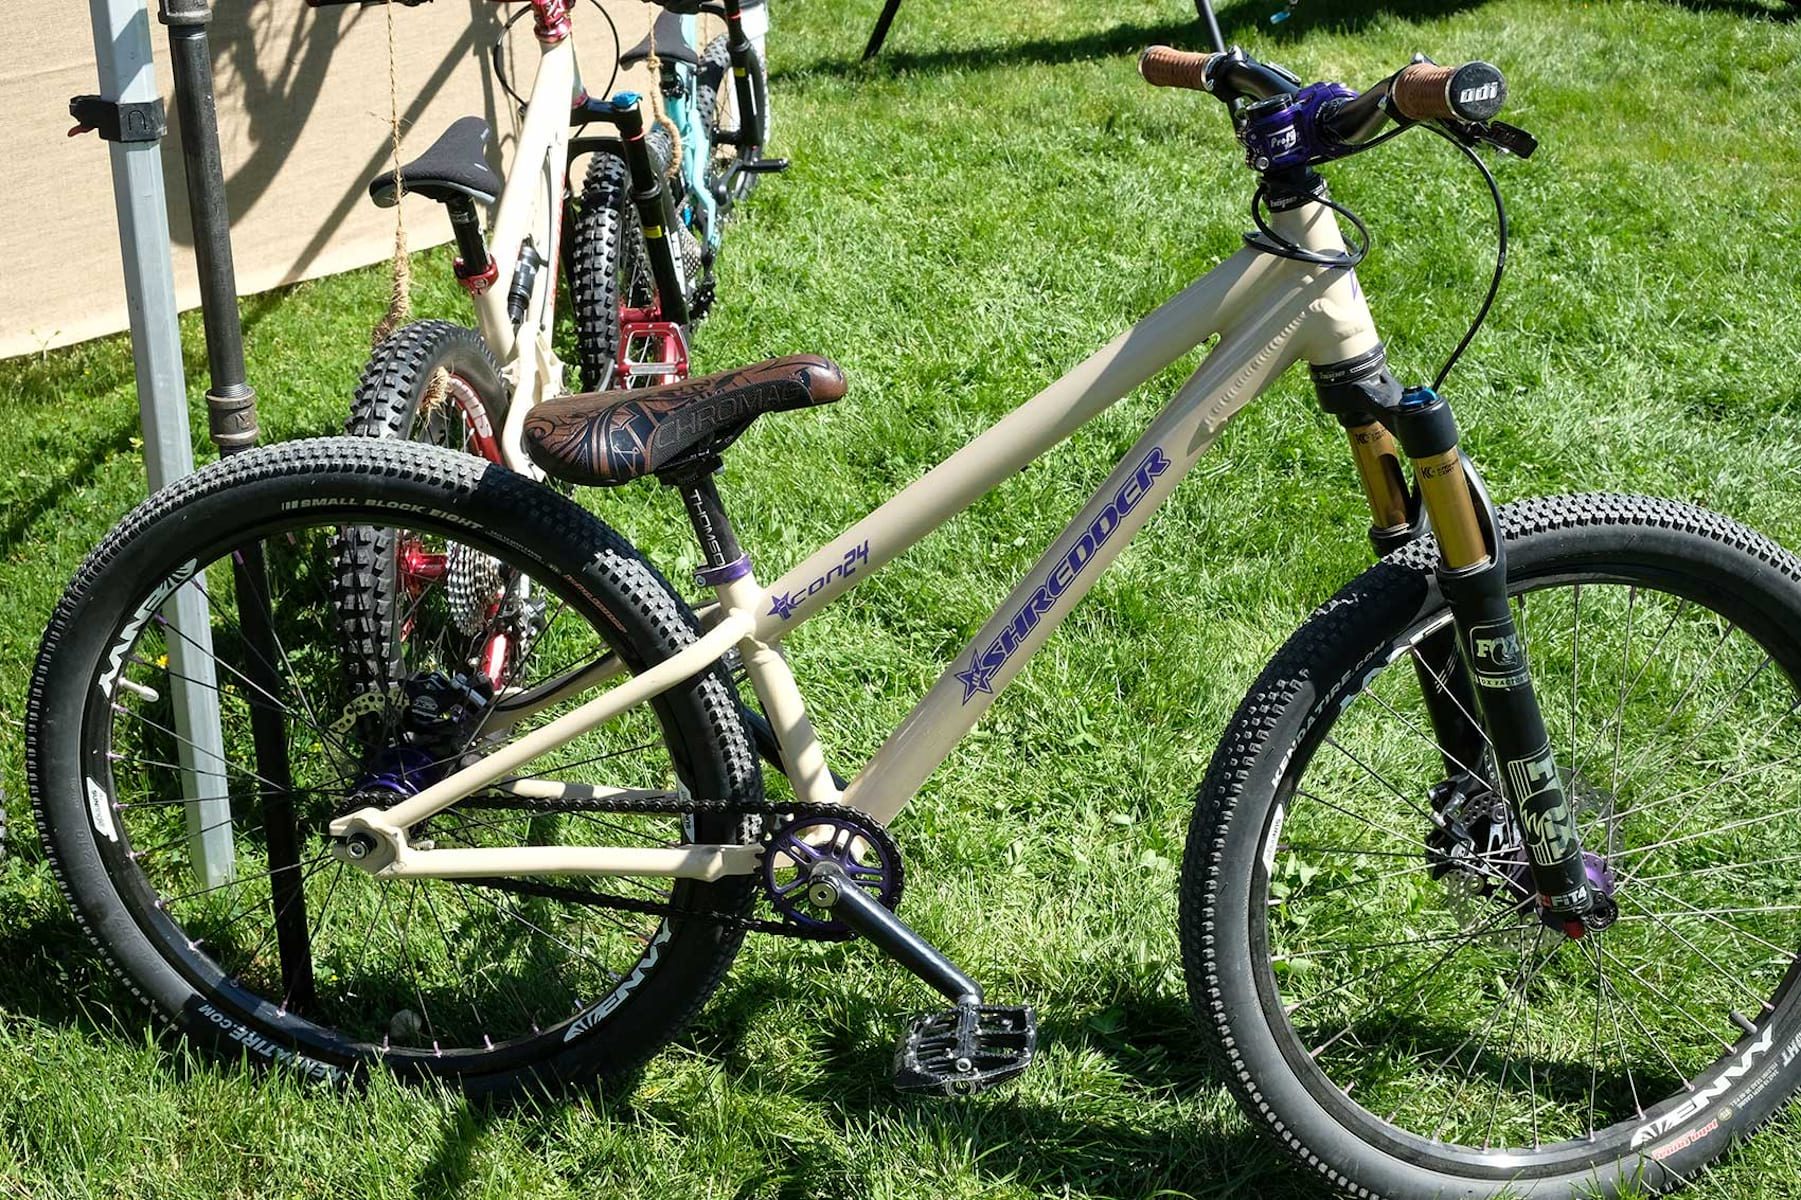 sea otter classic 2019, new products, shredder